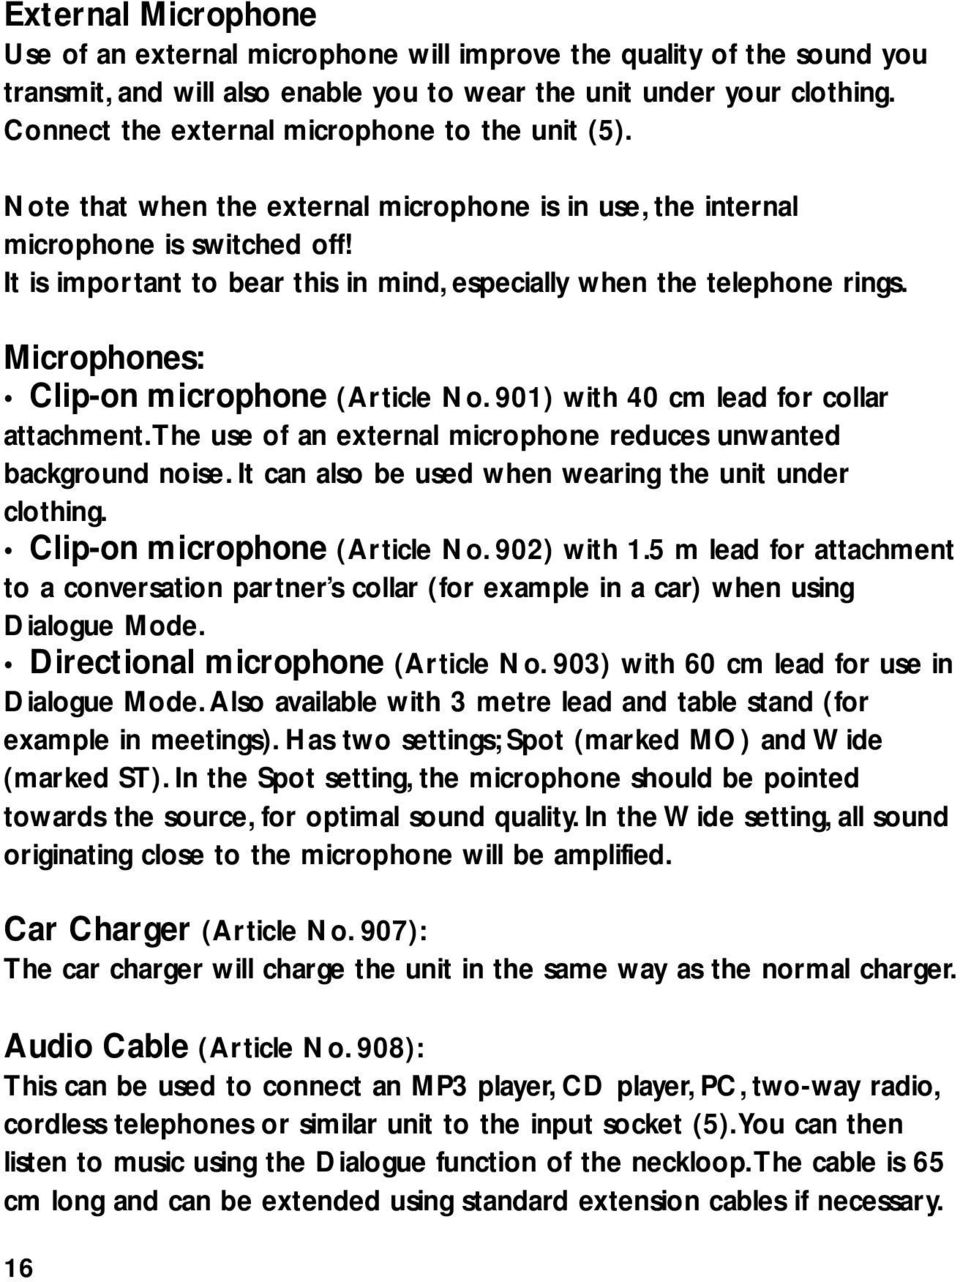 It is important to bear this in mind, especially when the telephone rings. Microphones: Clip-on microphone (Article No. 901) with 40 cm lead for collar attachment.